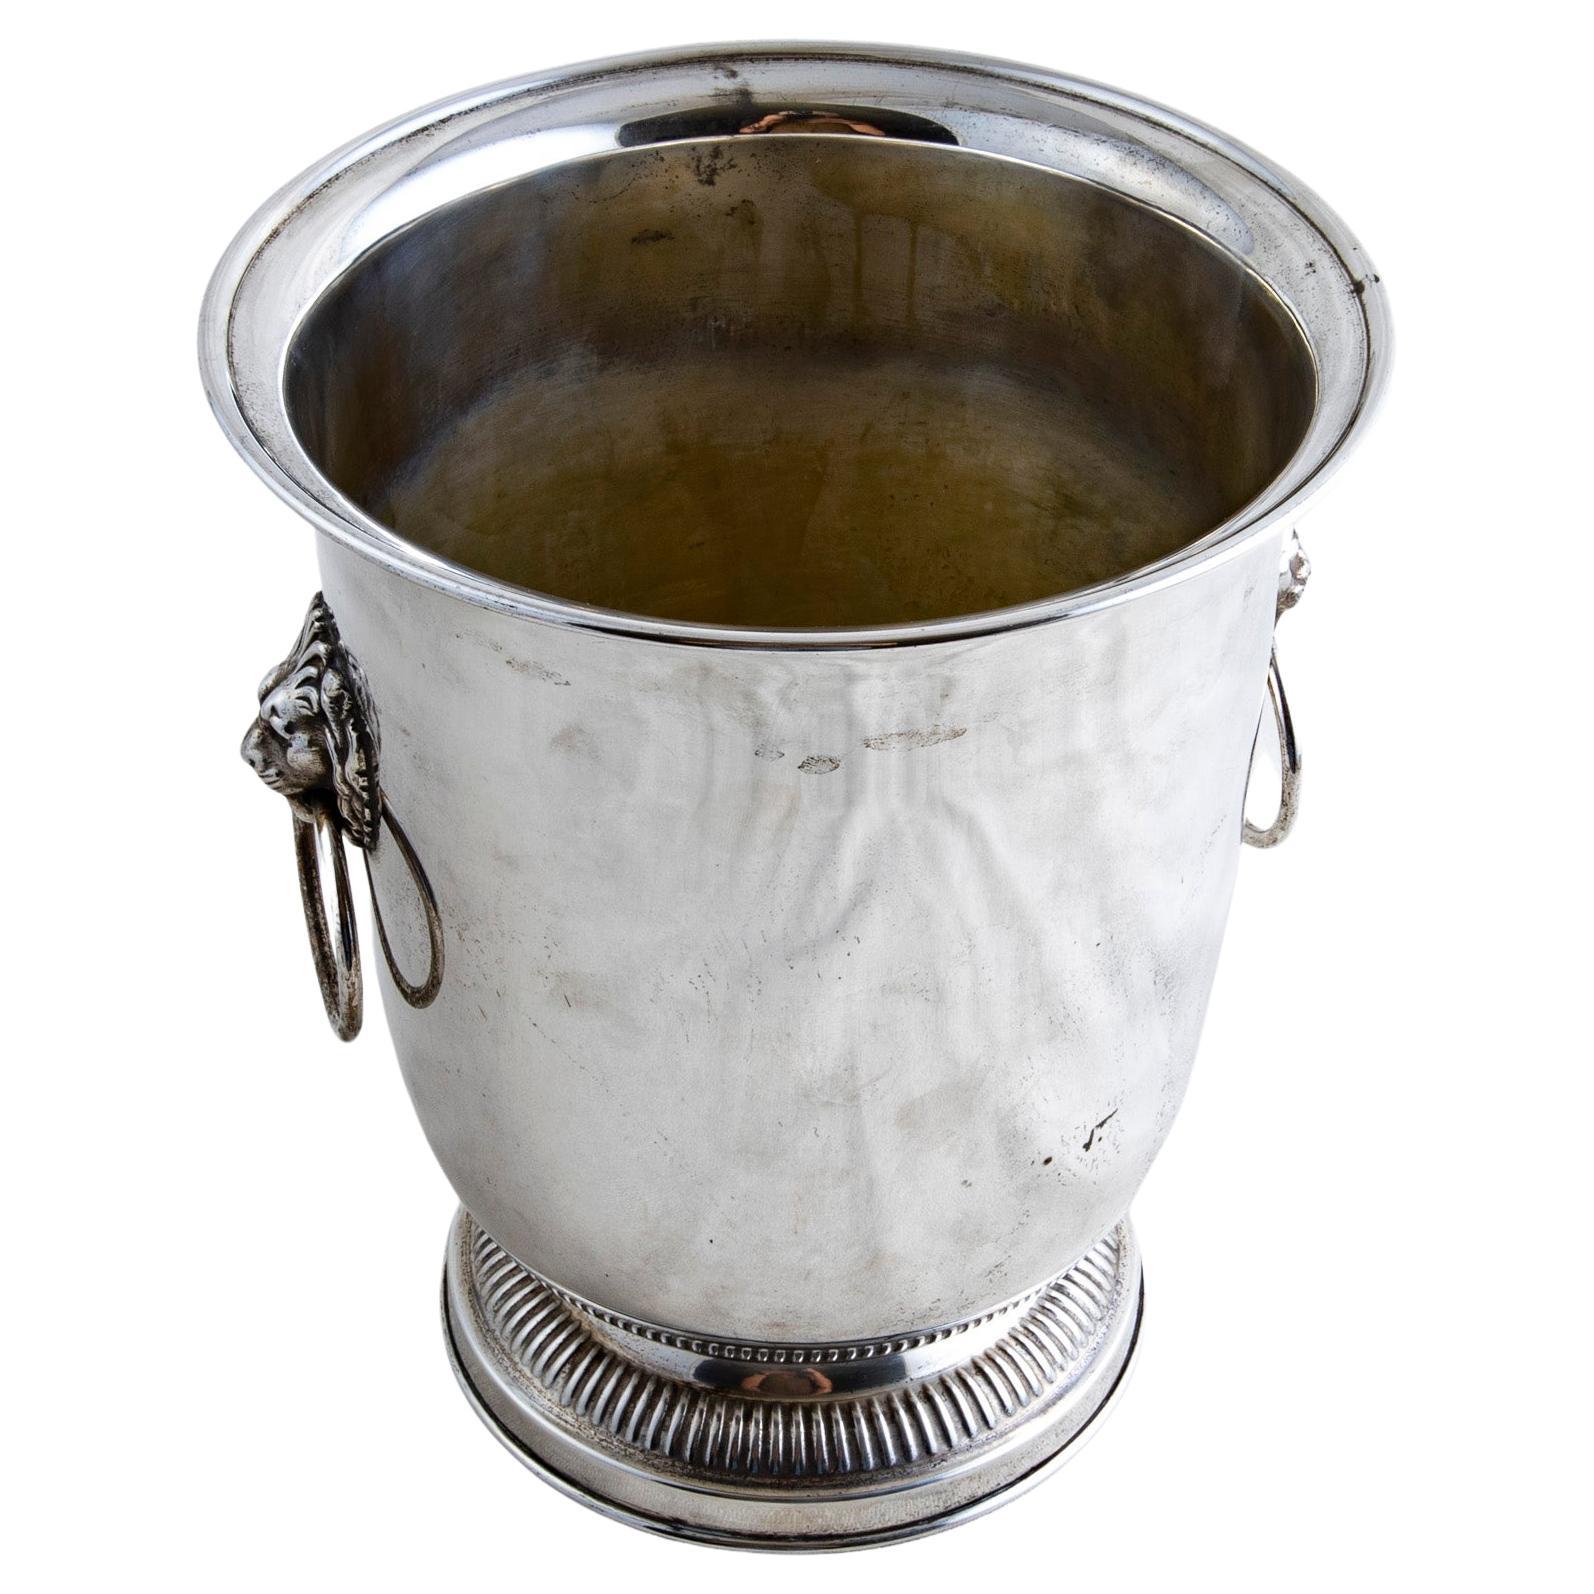 This mid-twentieth century French silver plate champagne bucket features a lion's head on each side with a drop ring handle. The bucket stands on a fluted footed base. A beautiful addition to any bar, circa 1950.